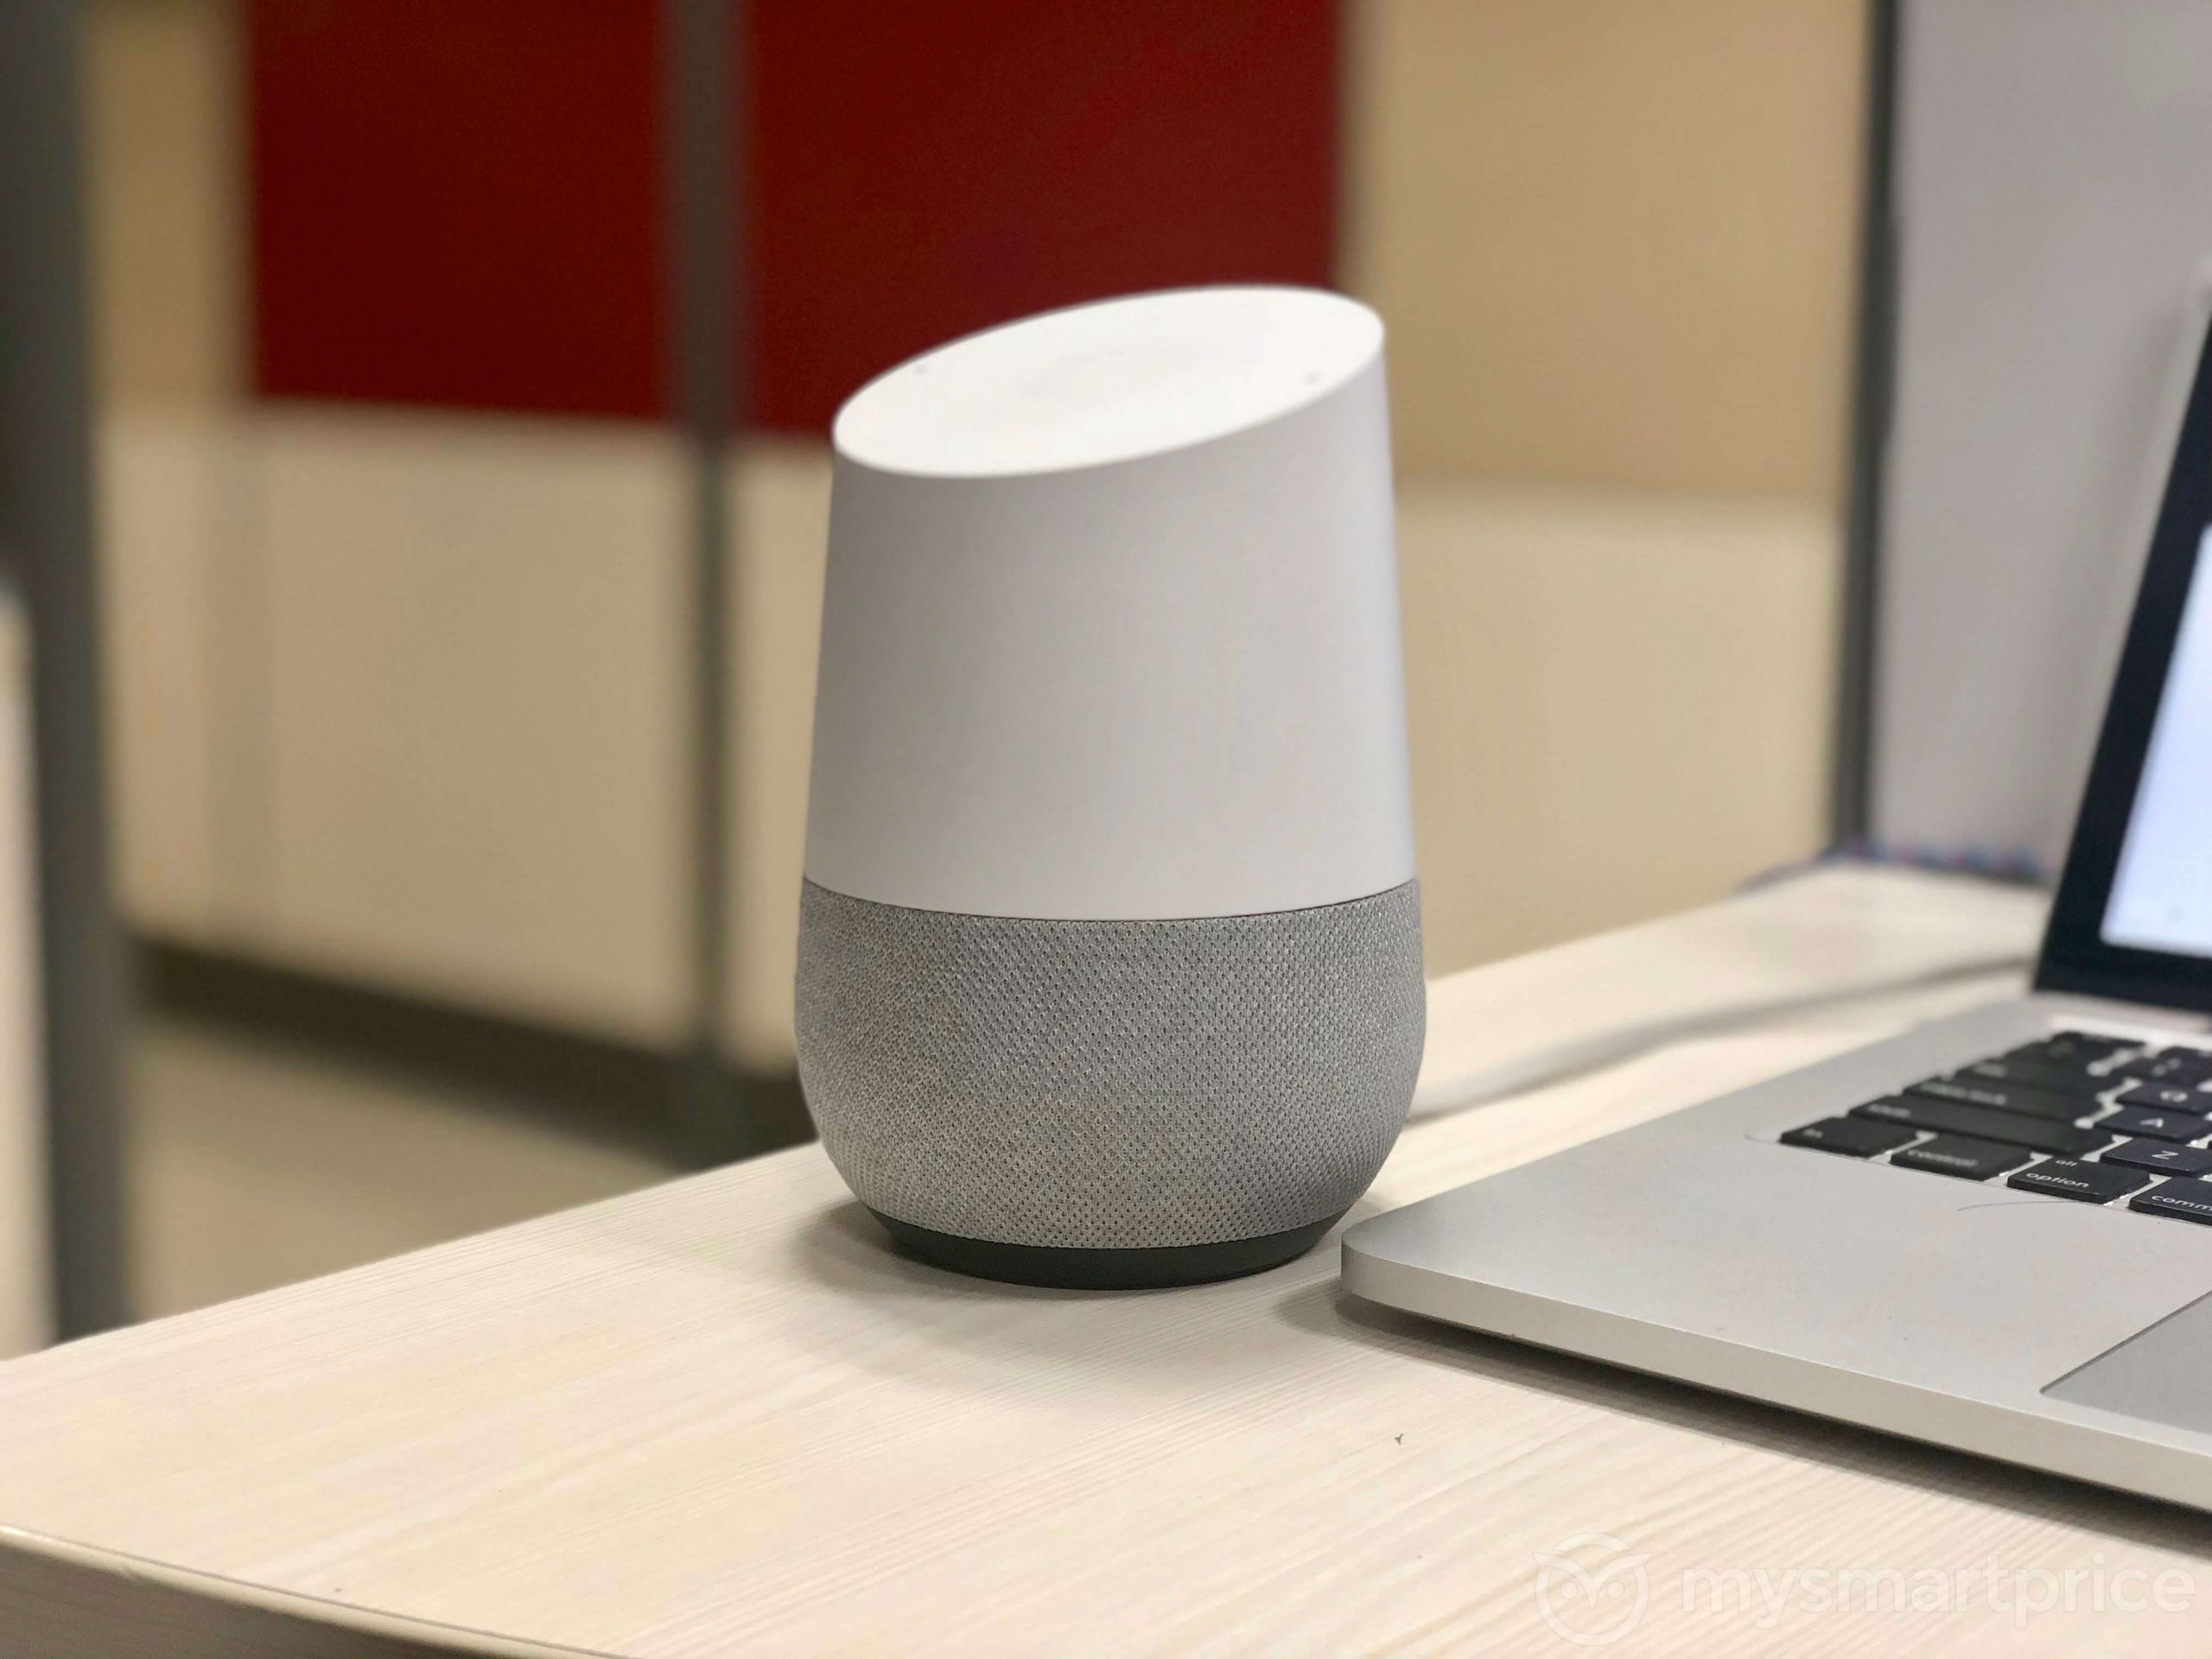 Turn Off Annoying Command Responses on Your Google Home